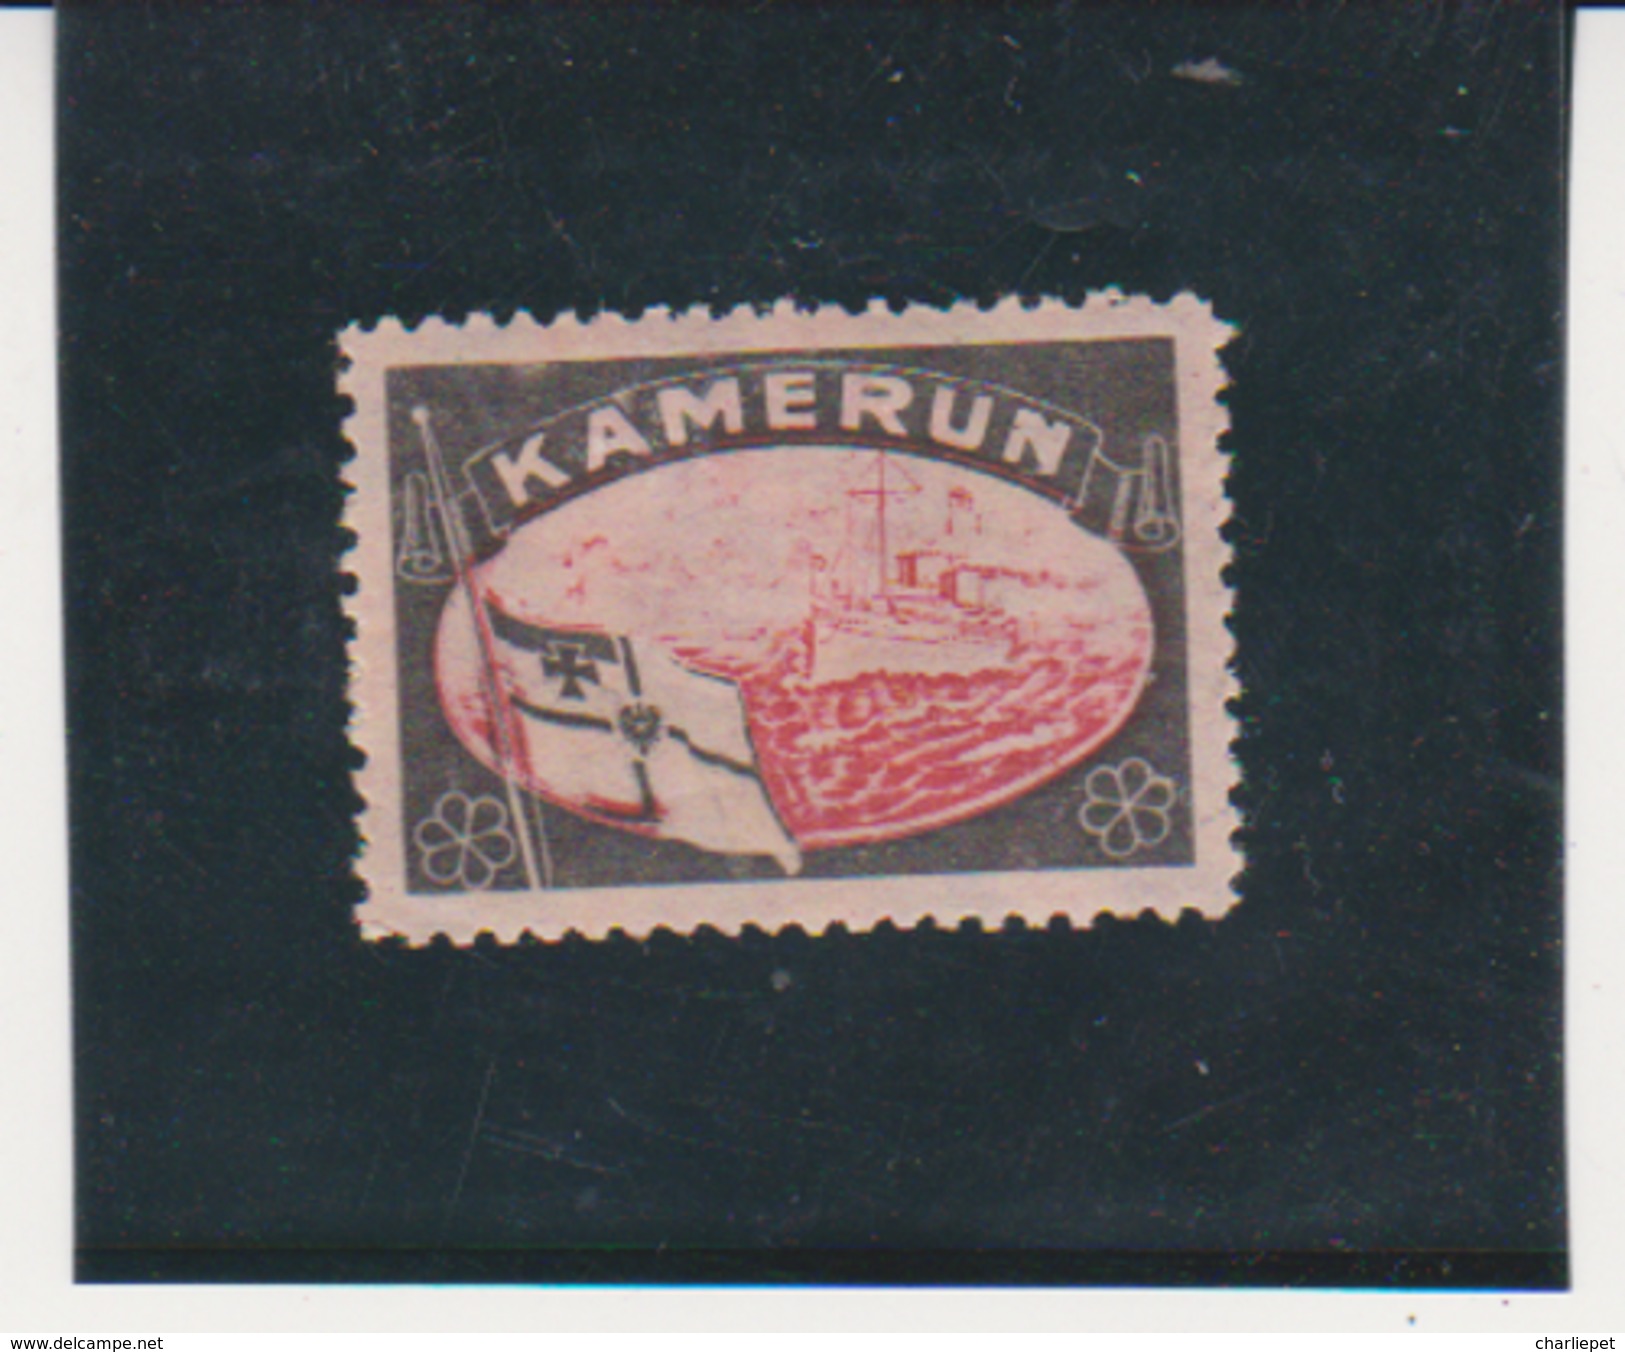 German Germany Mourning Labels Lost Colonies Cameroun Kamerun Cinderella Issued In 1920 By Sigmund Hartig MH - Camerun